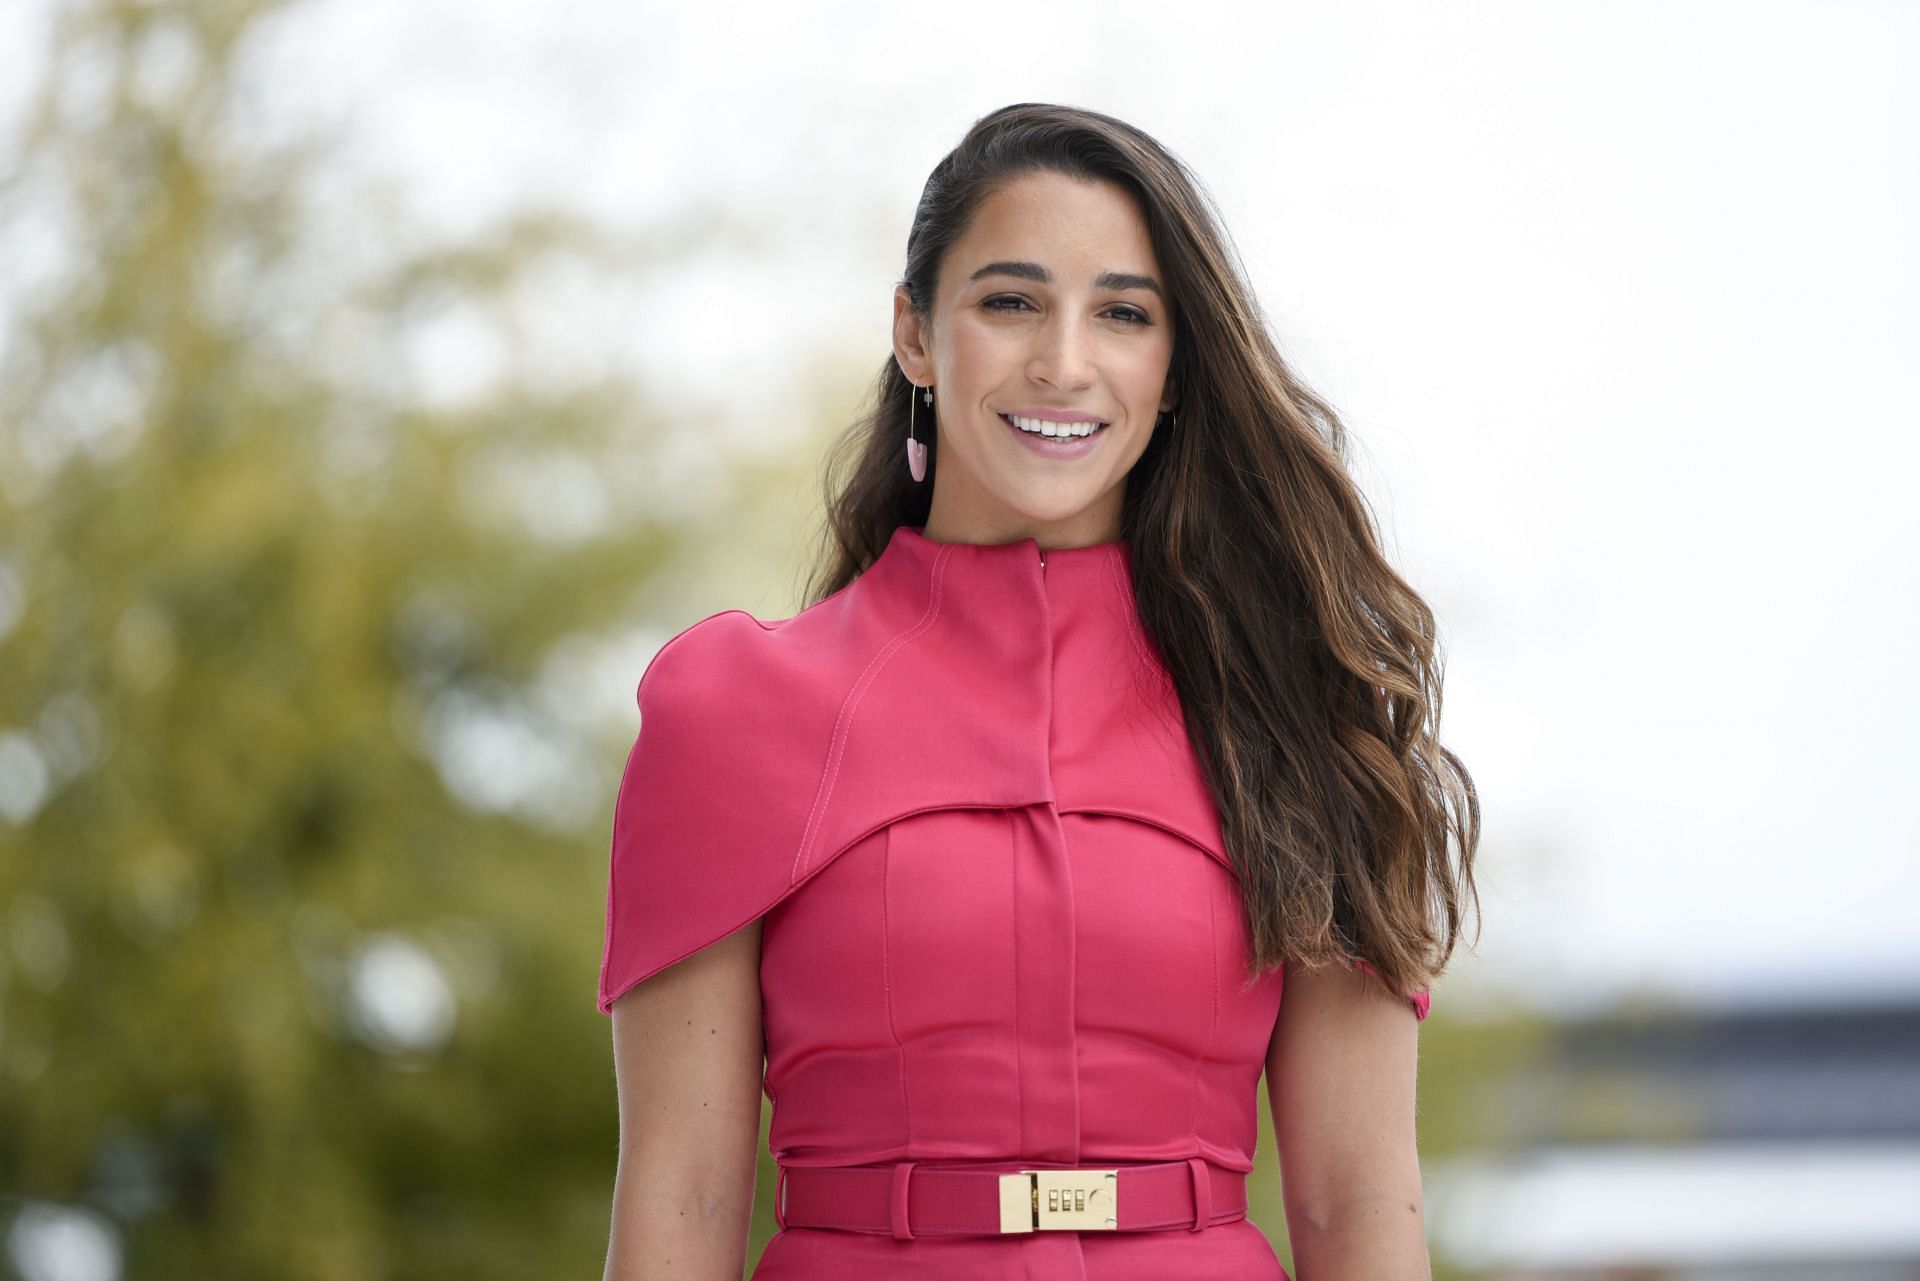 Raisman at Apple product launch event in Cupertino